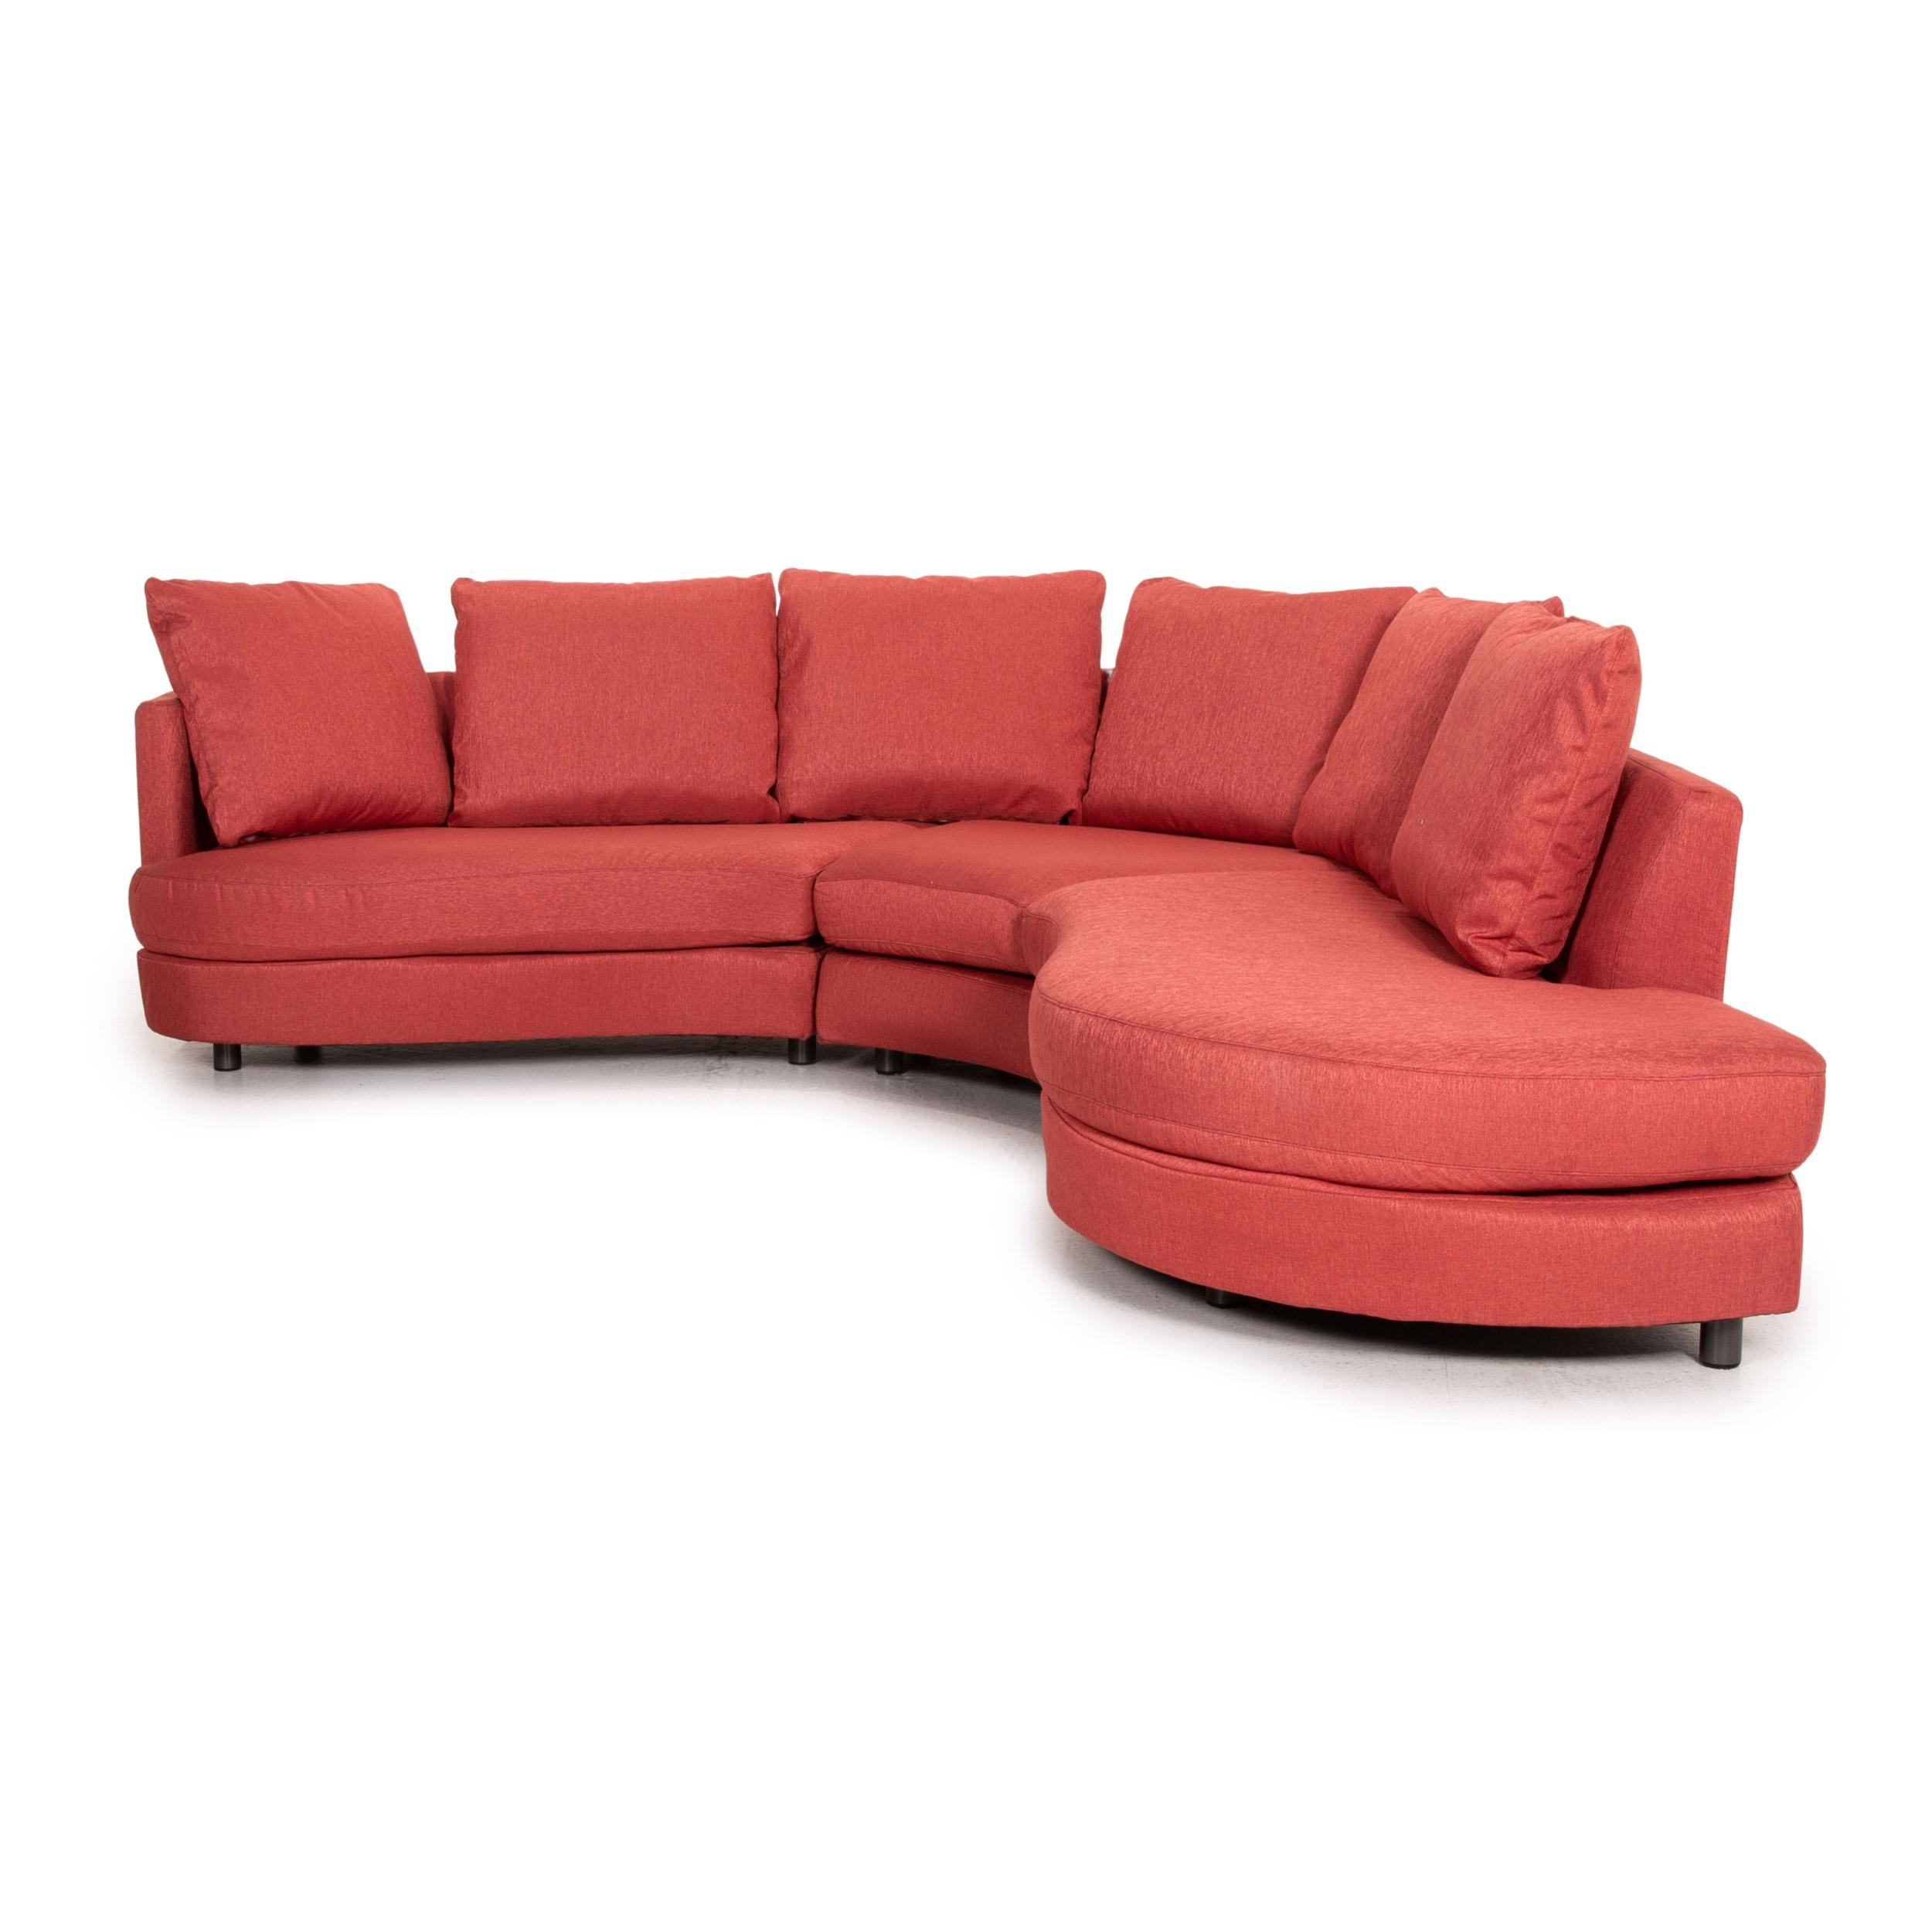 Rolf Benz Fabric Corner Sofa Red Sofa Couch For Sale 3